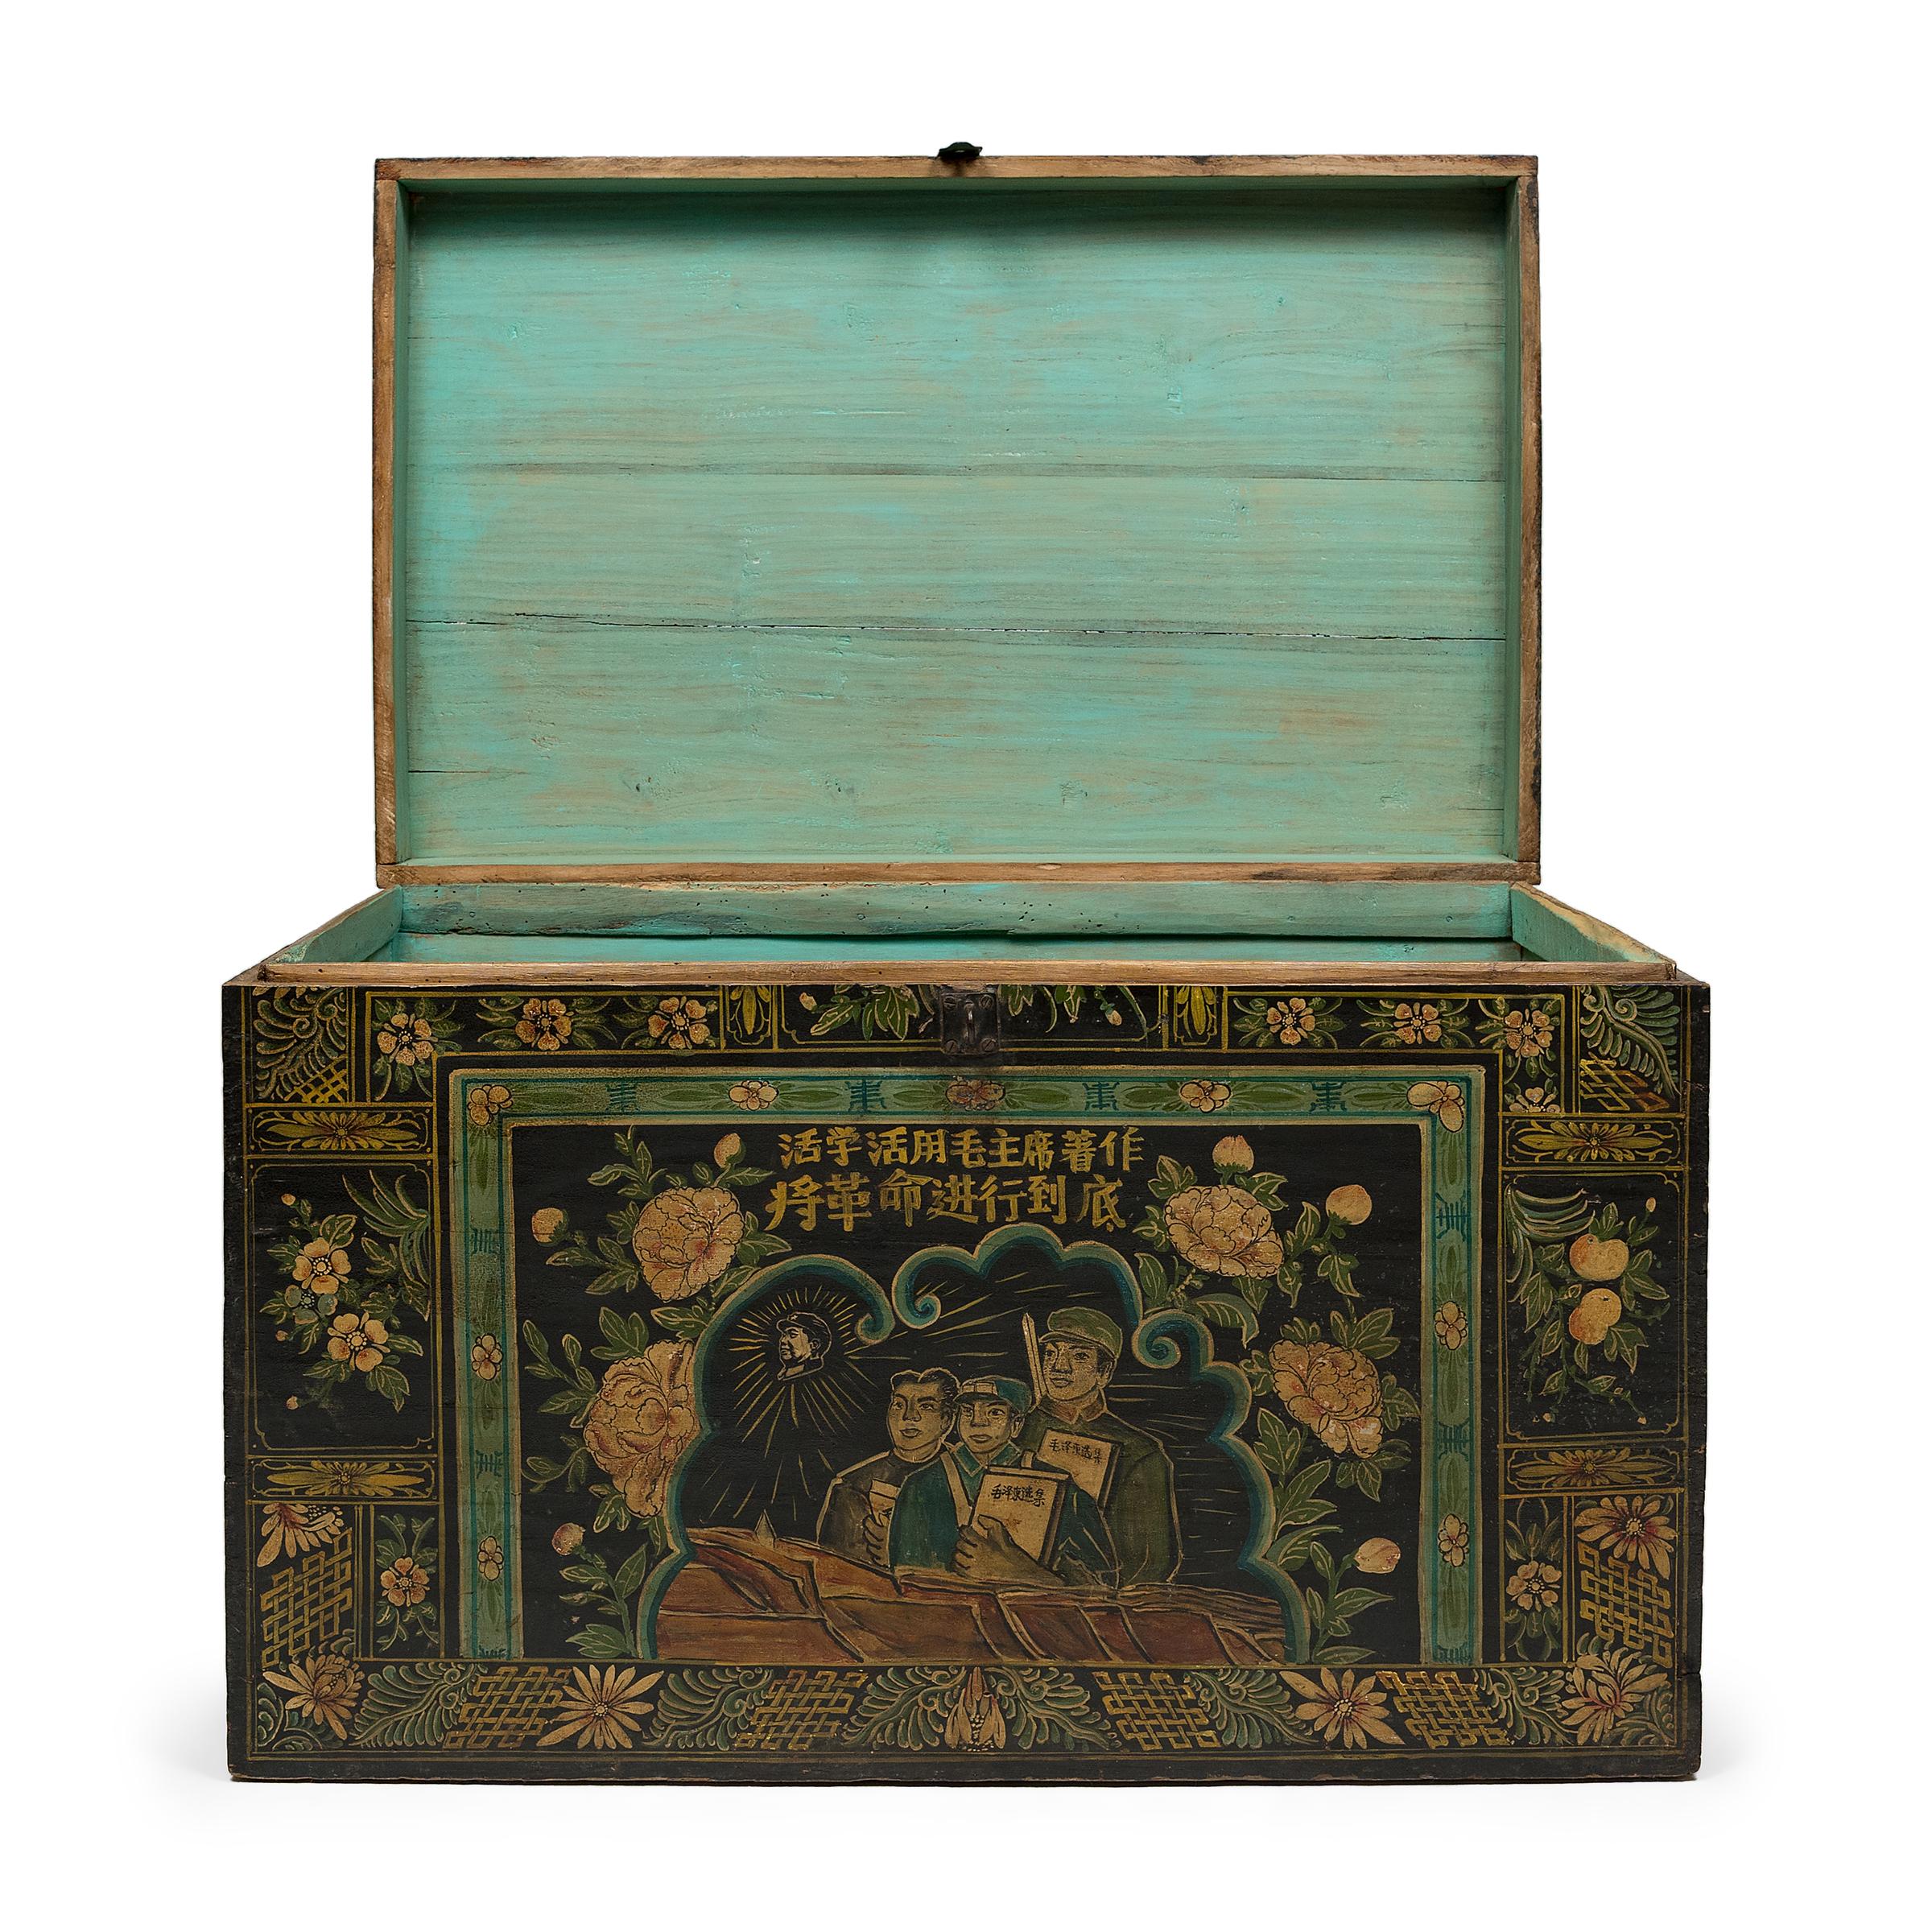 Trunks and storage chests were the most ubiquitous form of household storage throughout the Ming and Qing dynasties. Used to store clothes, linens, kitchen utensils, and other miscellaneous items, trunks were found in every room in the home and were